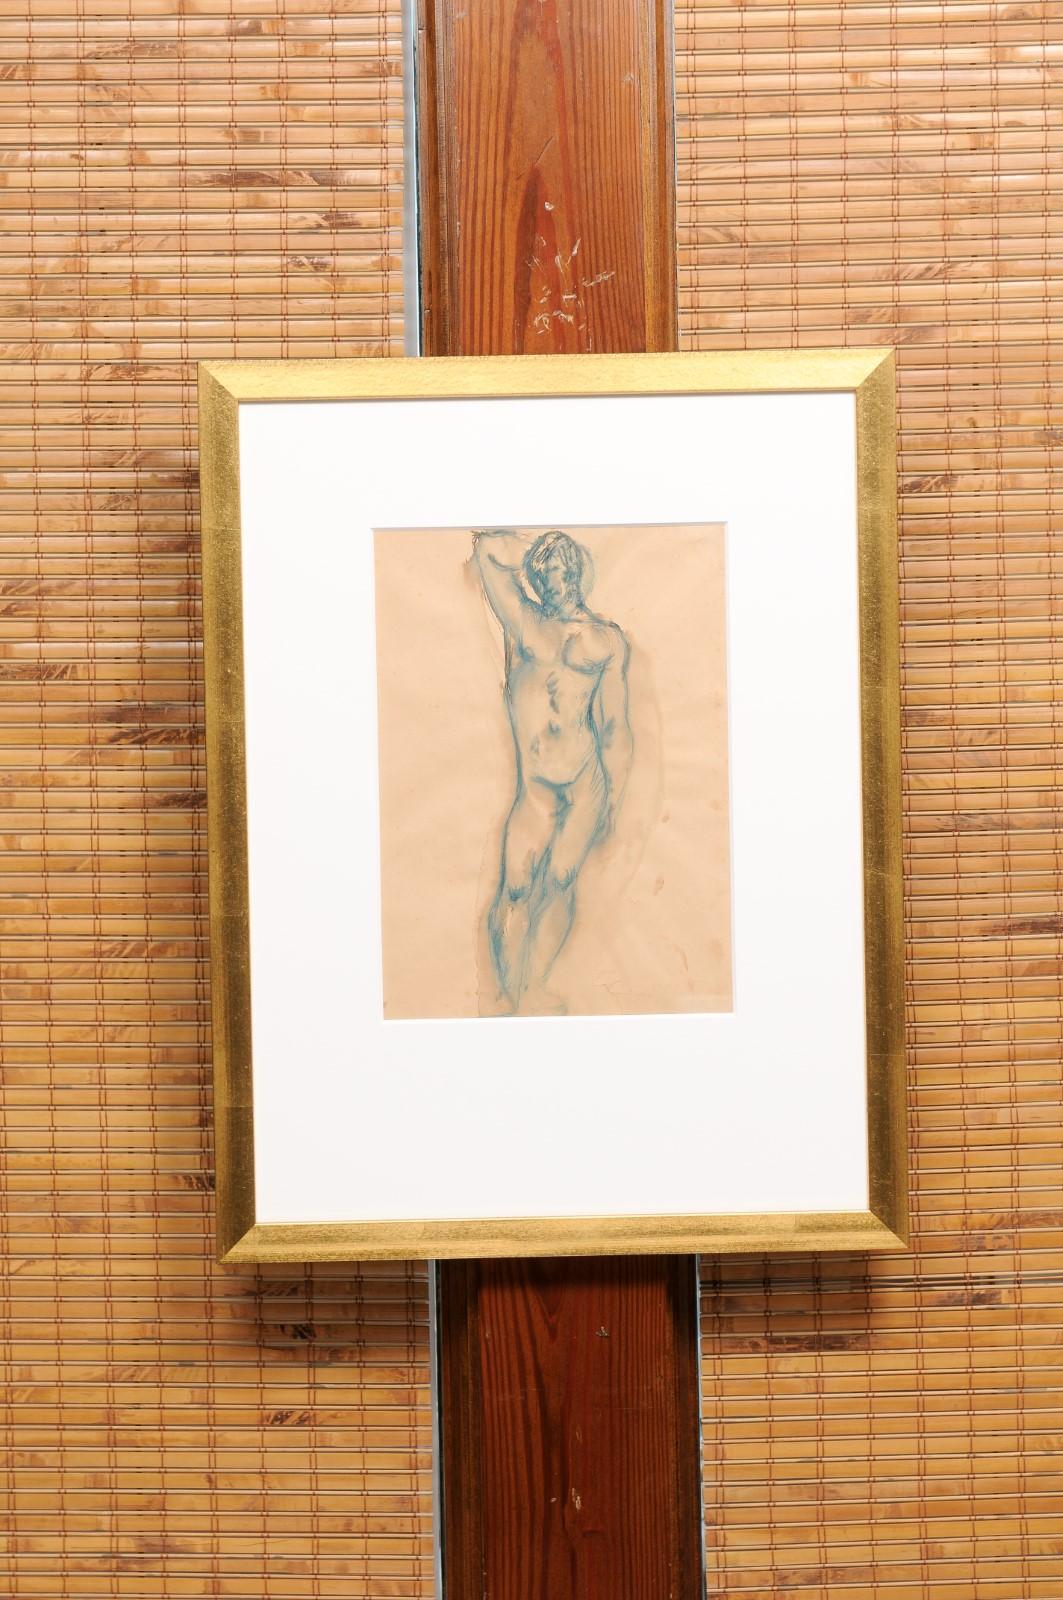 Fritz Wotruba - Untitled (Nude). Ink on Paper. Framed in Wood Gold.